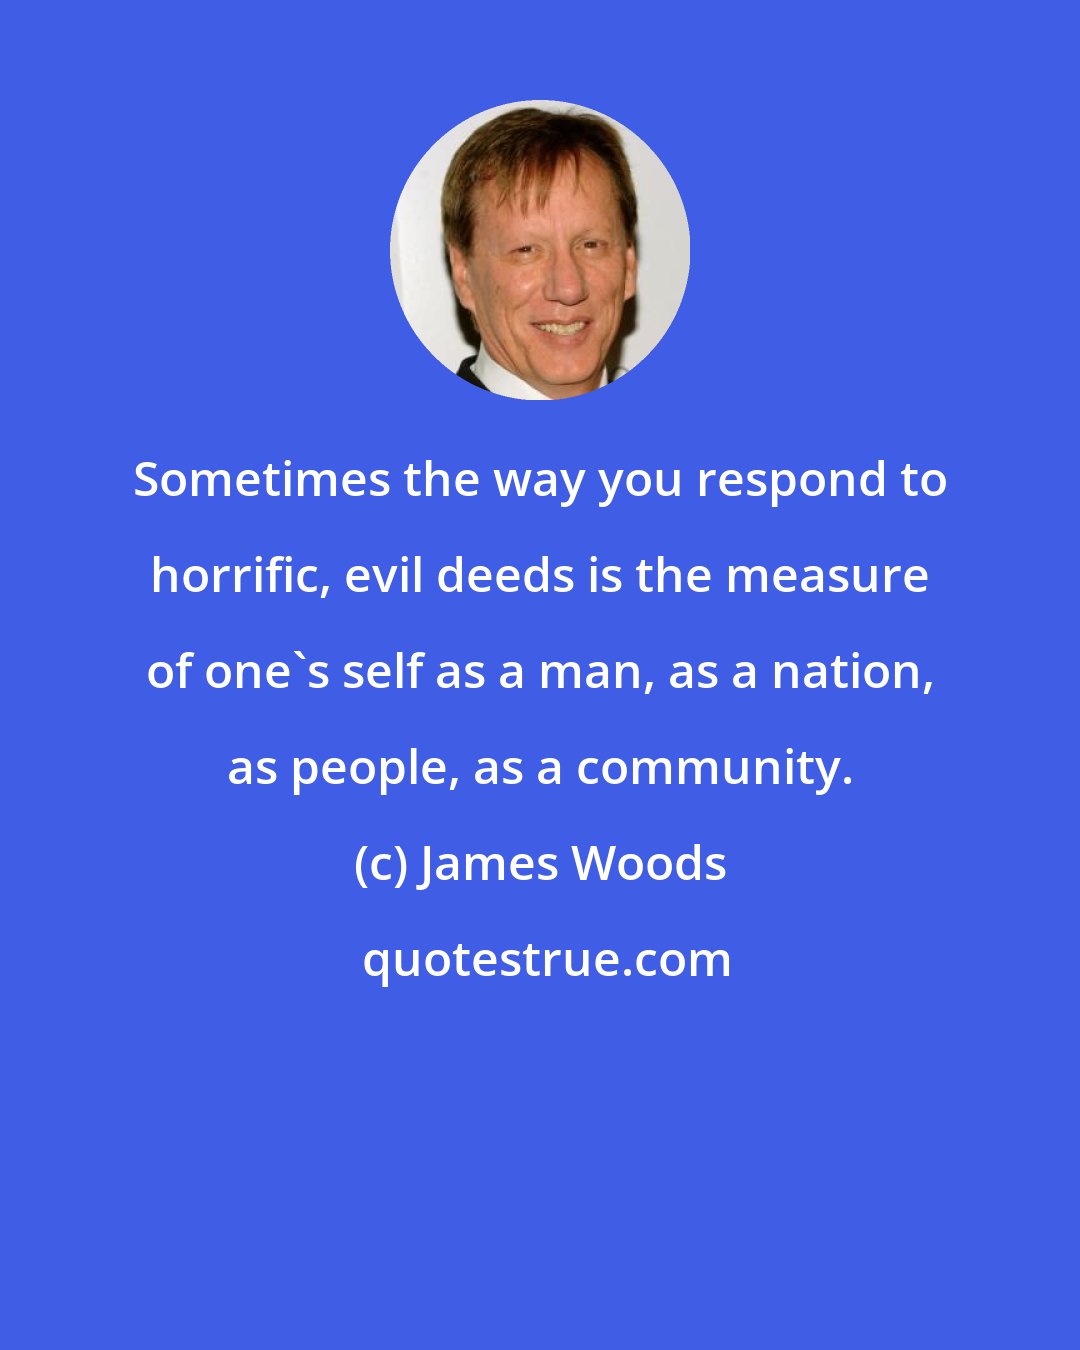 James Woods: Sometimes the way you respond to horrific, evil deeds is the measure of one's self as a man, as a nation, as people, as a community.